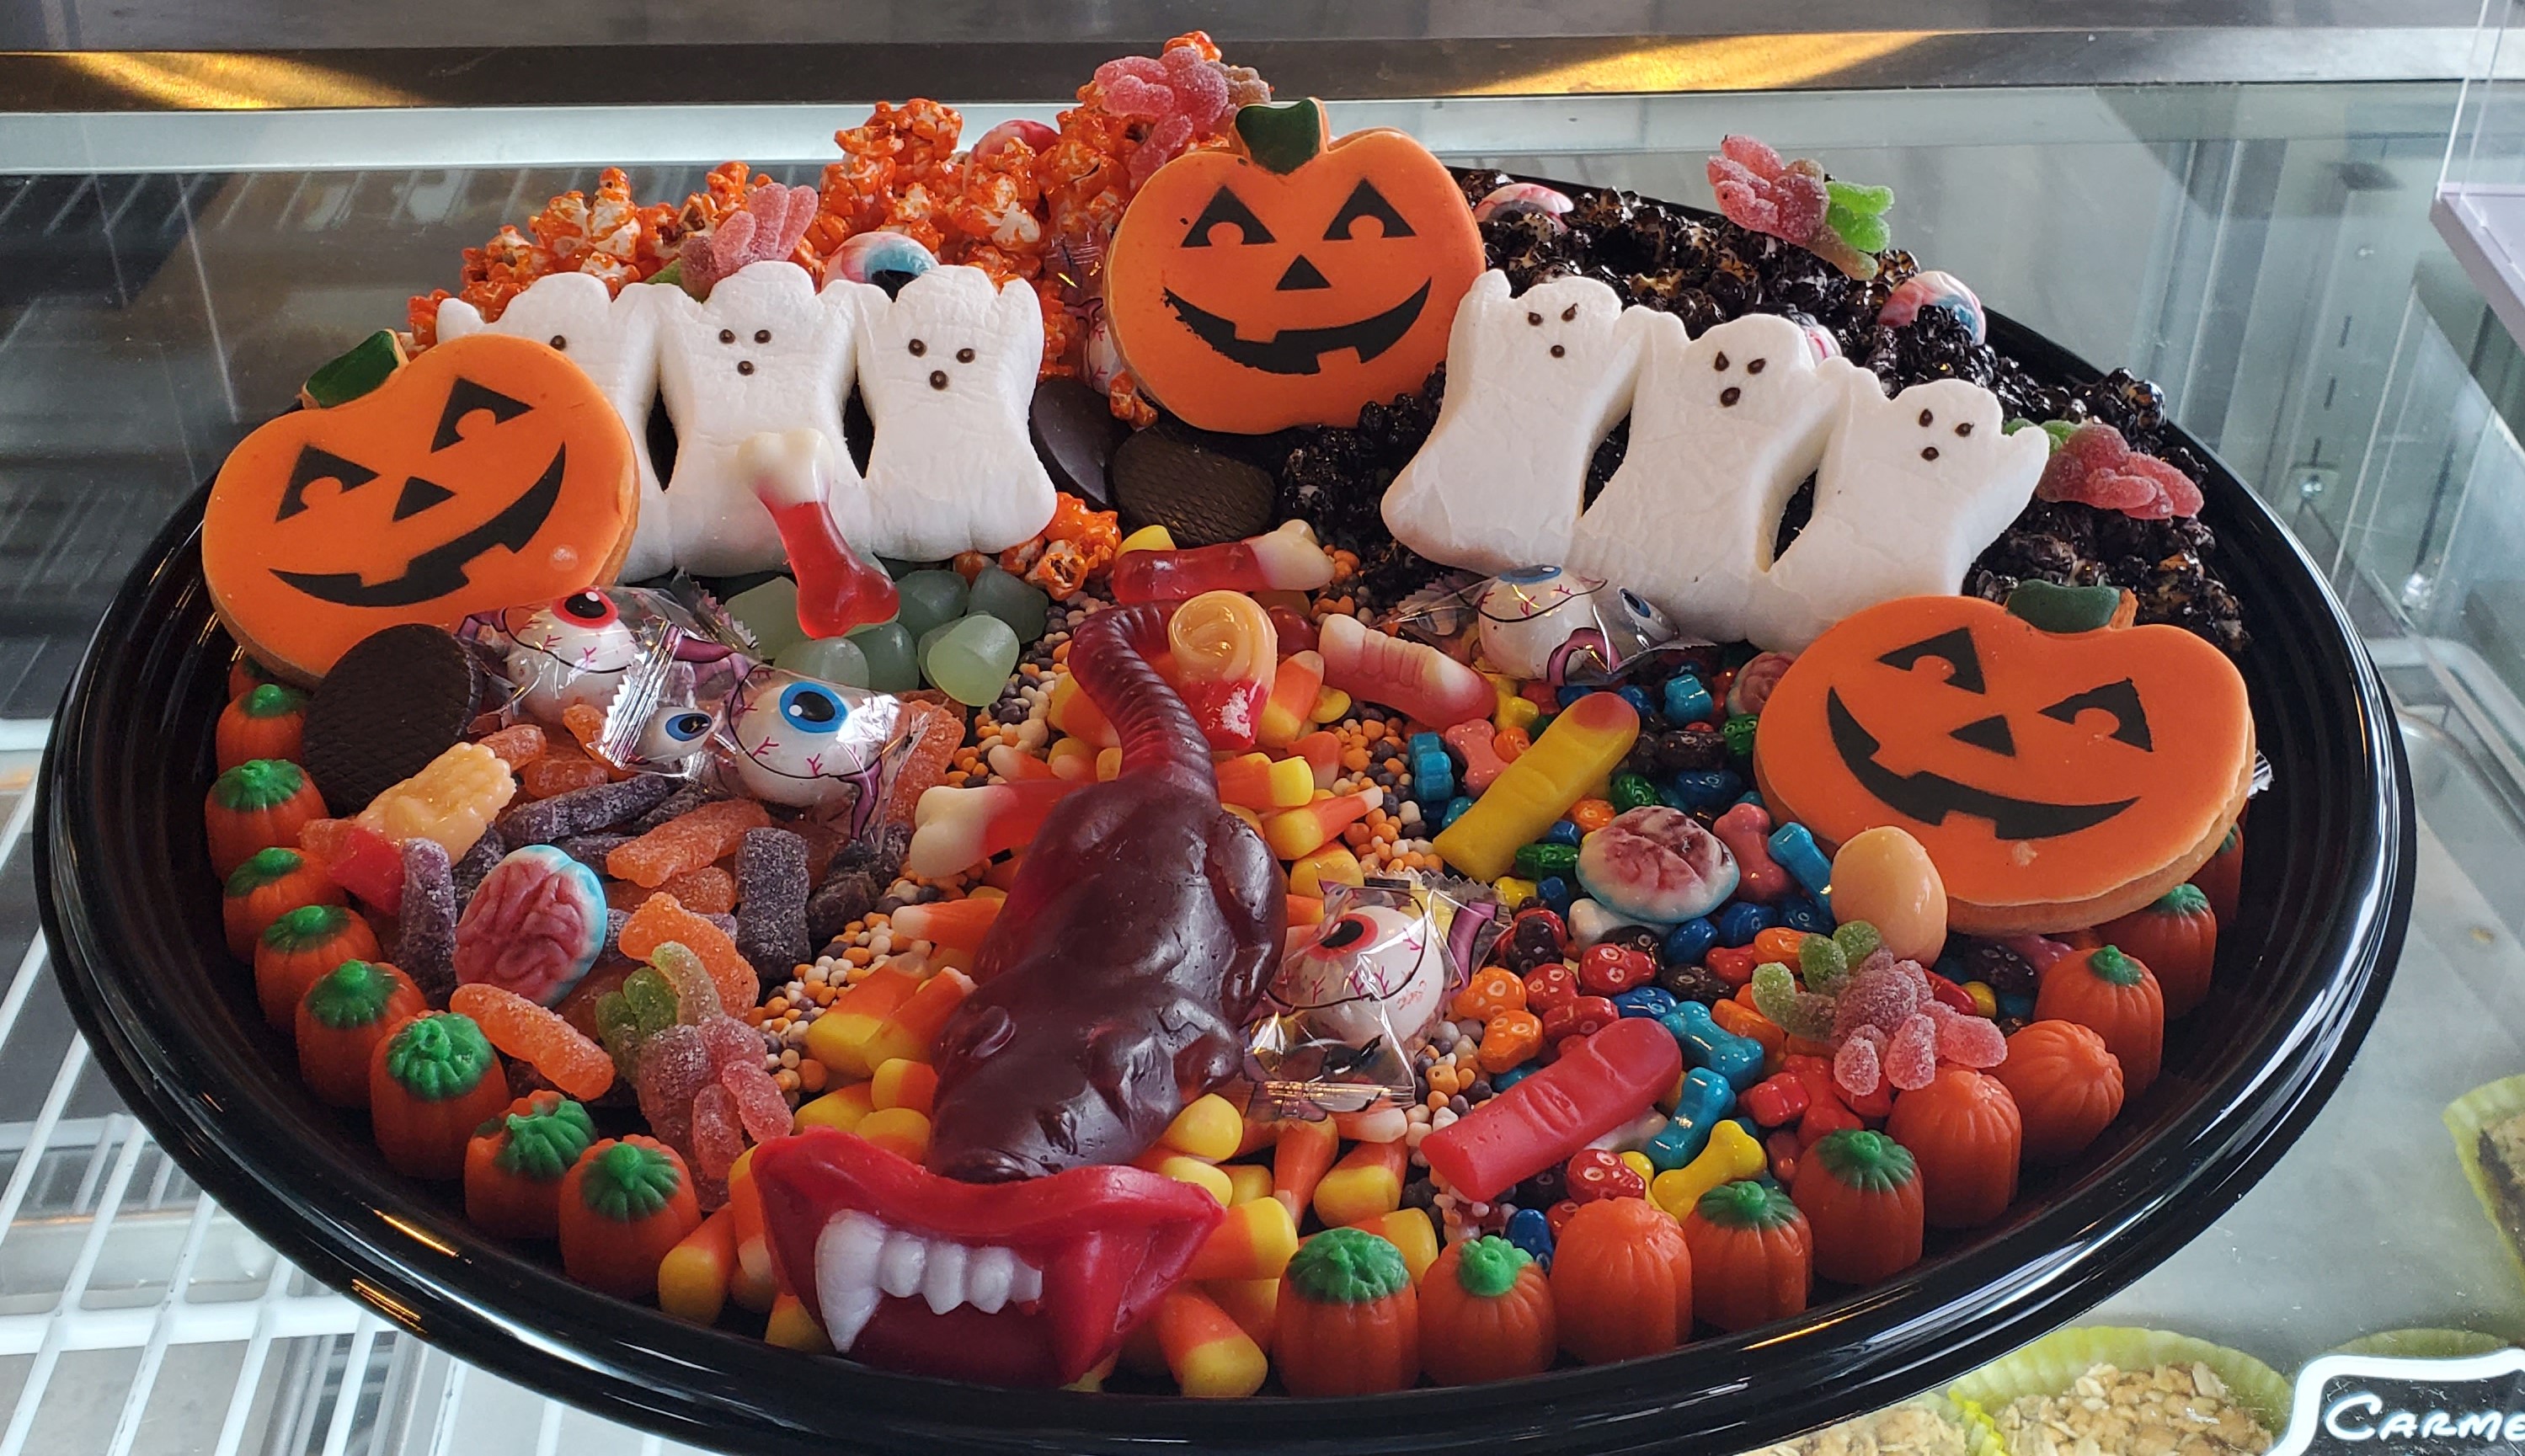 A round tray decorated with halloween candy including marshmallow ghosts, a gummi rat, and many other themed elements.